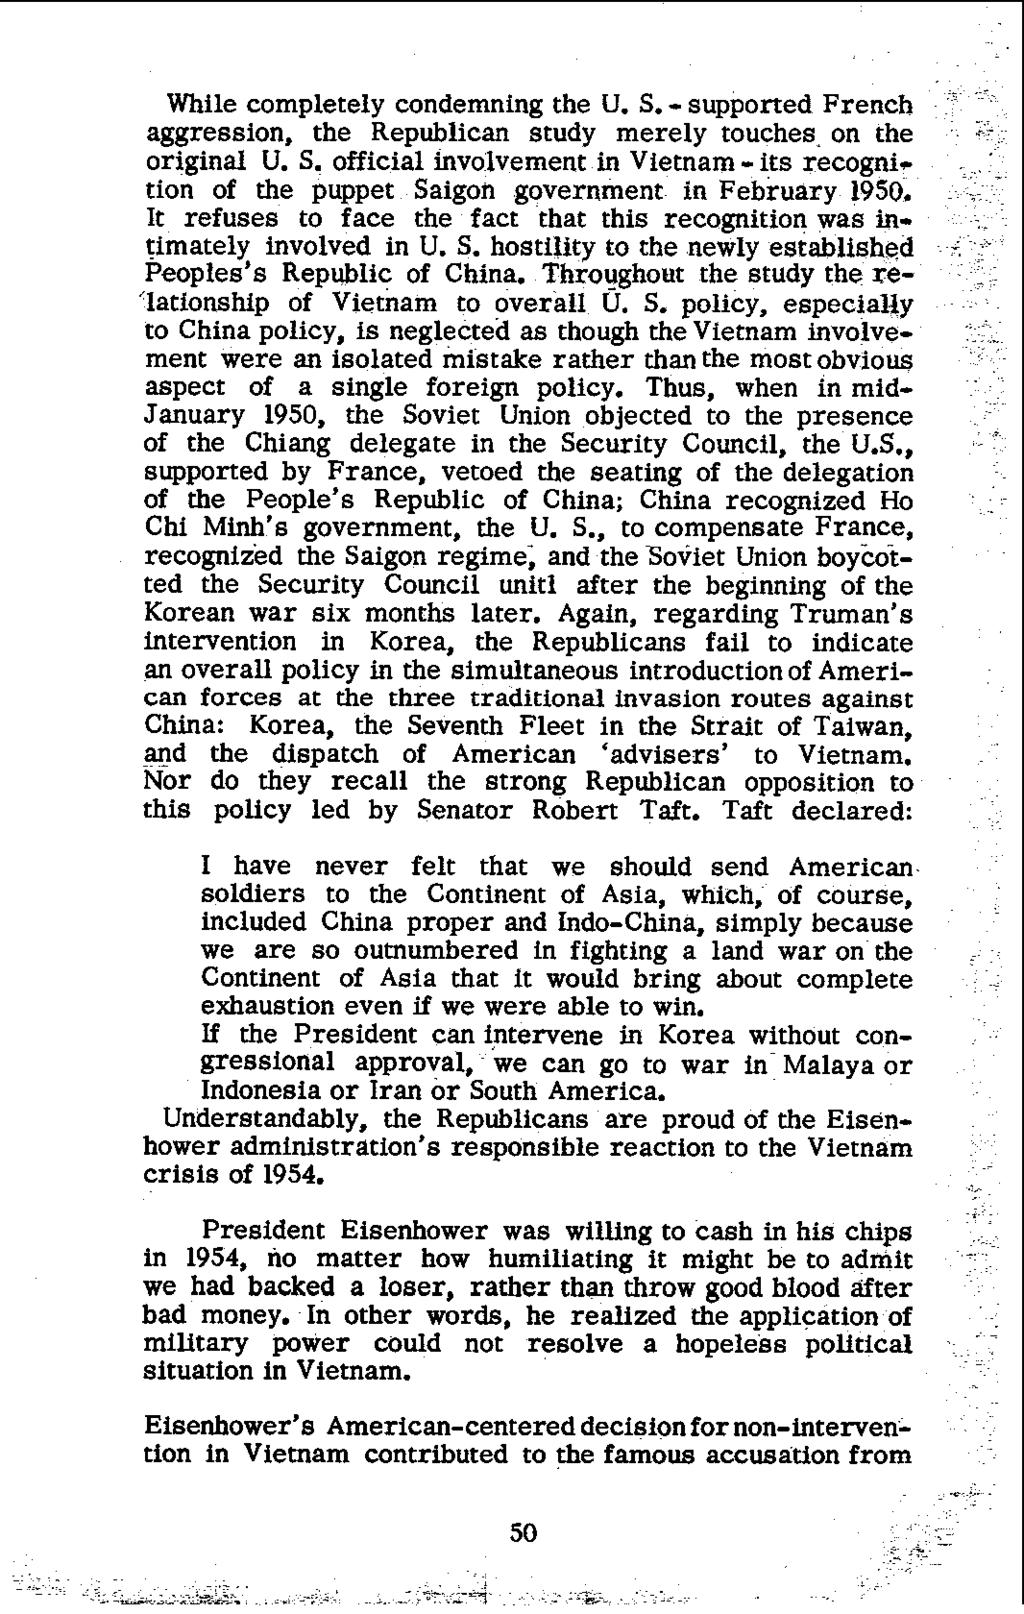 While completely condemning the U. S. - supported French aggression, the Republican study merely touches on the original U. S. official involvement in Vietnam - its recognition of the puppet Saigon government in February 1950.